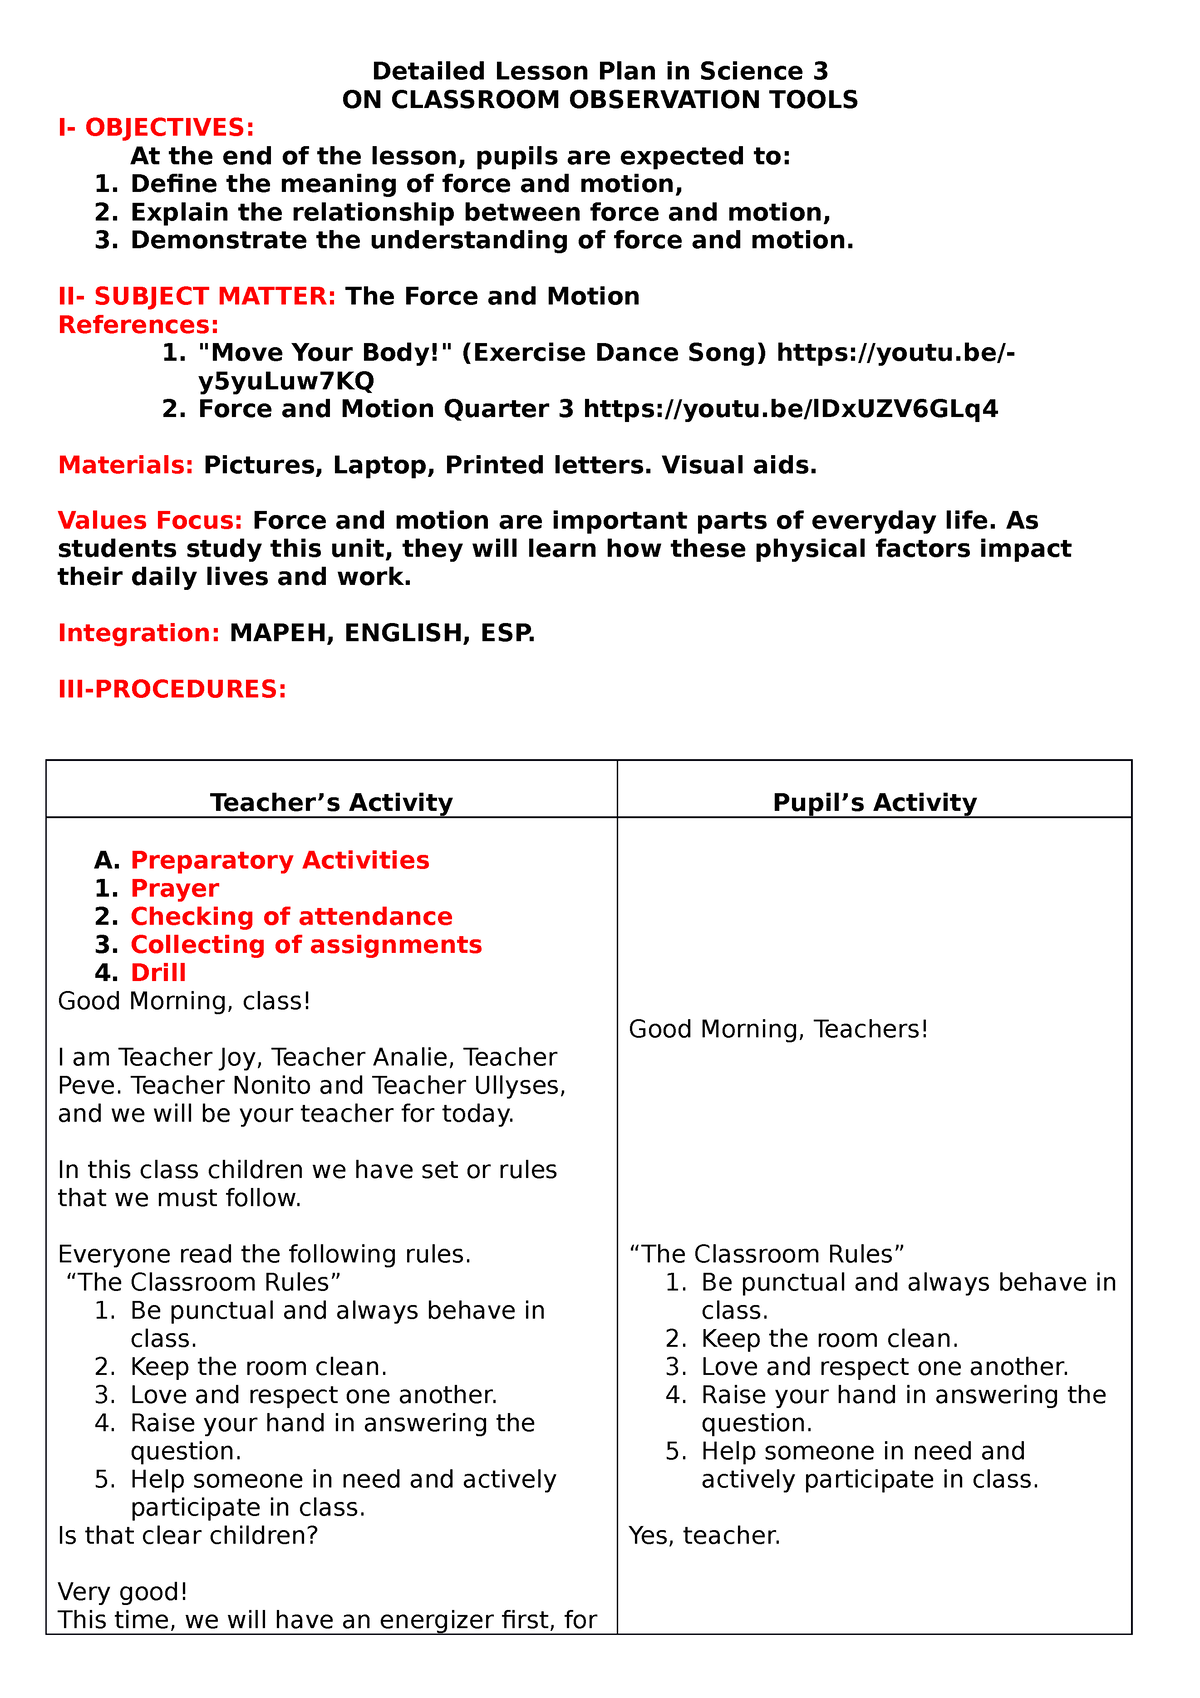 Dlp Force And Motion Be Byeee Detailed Lesson Plan In Science 3 On Classroom Observation 3052